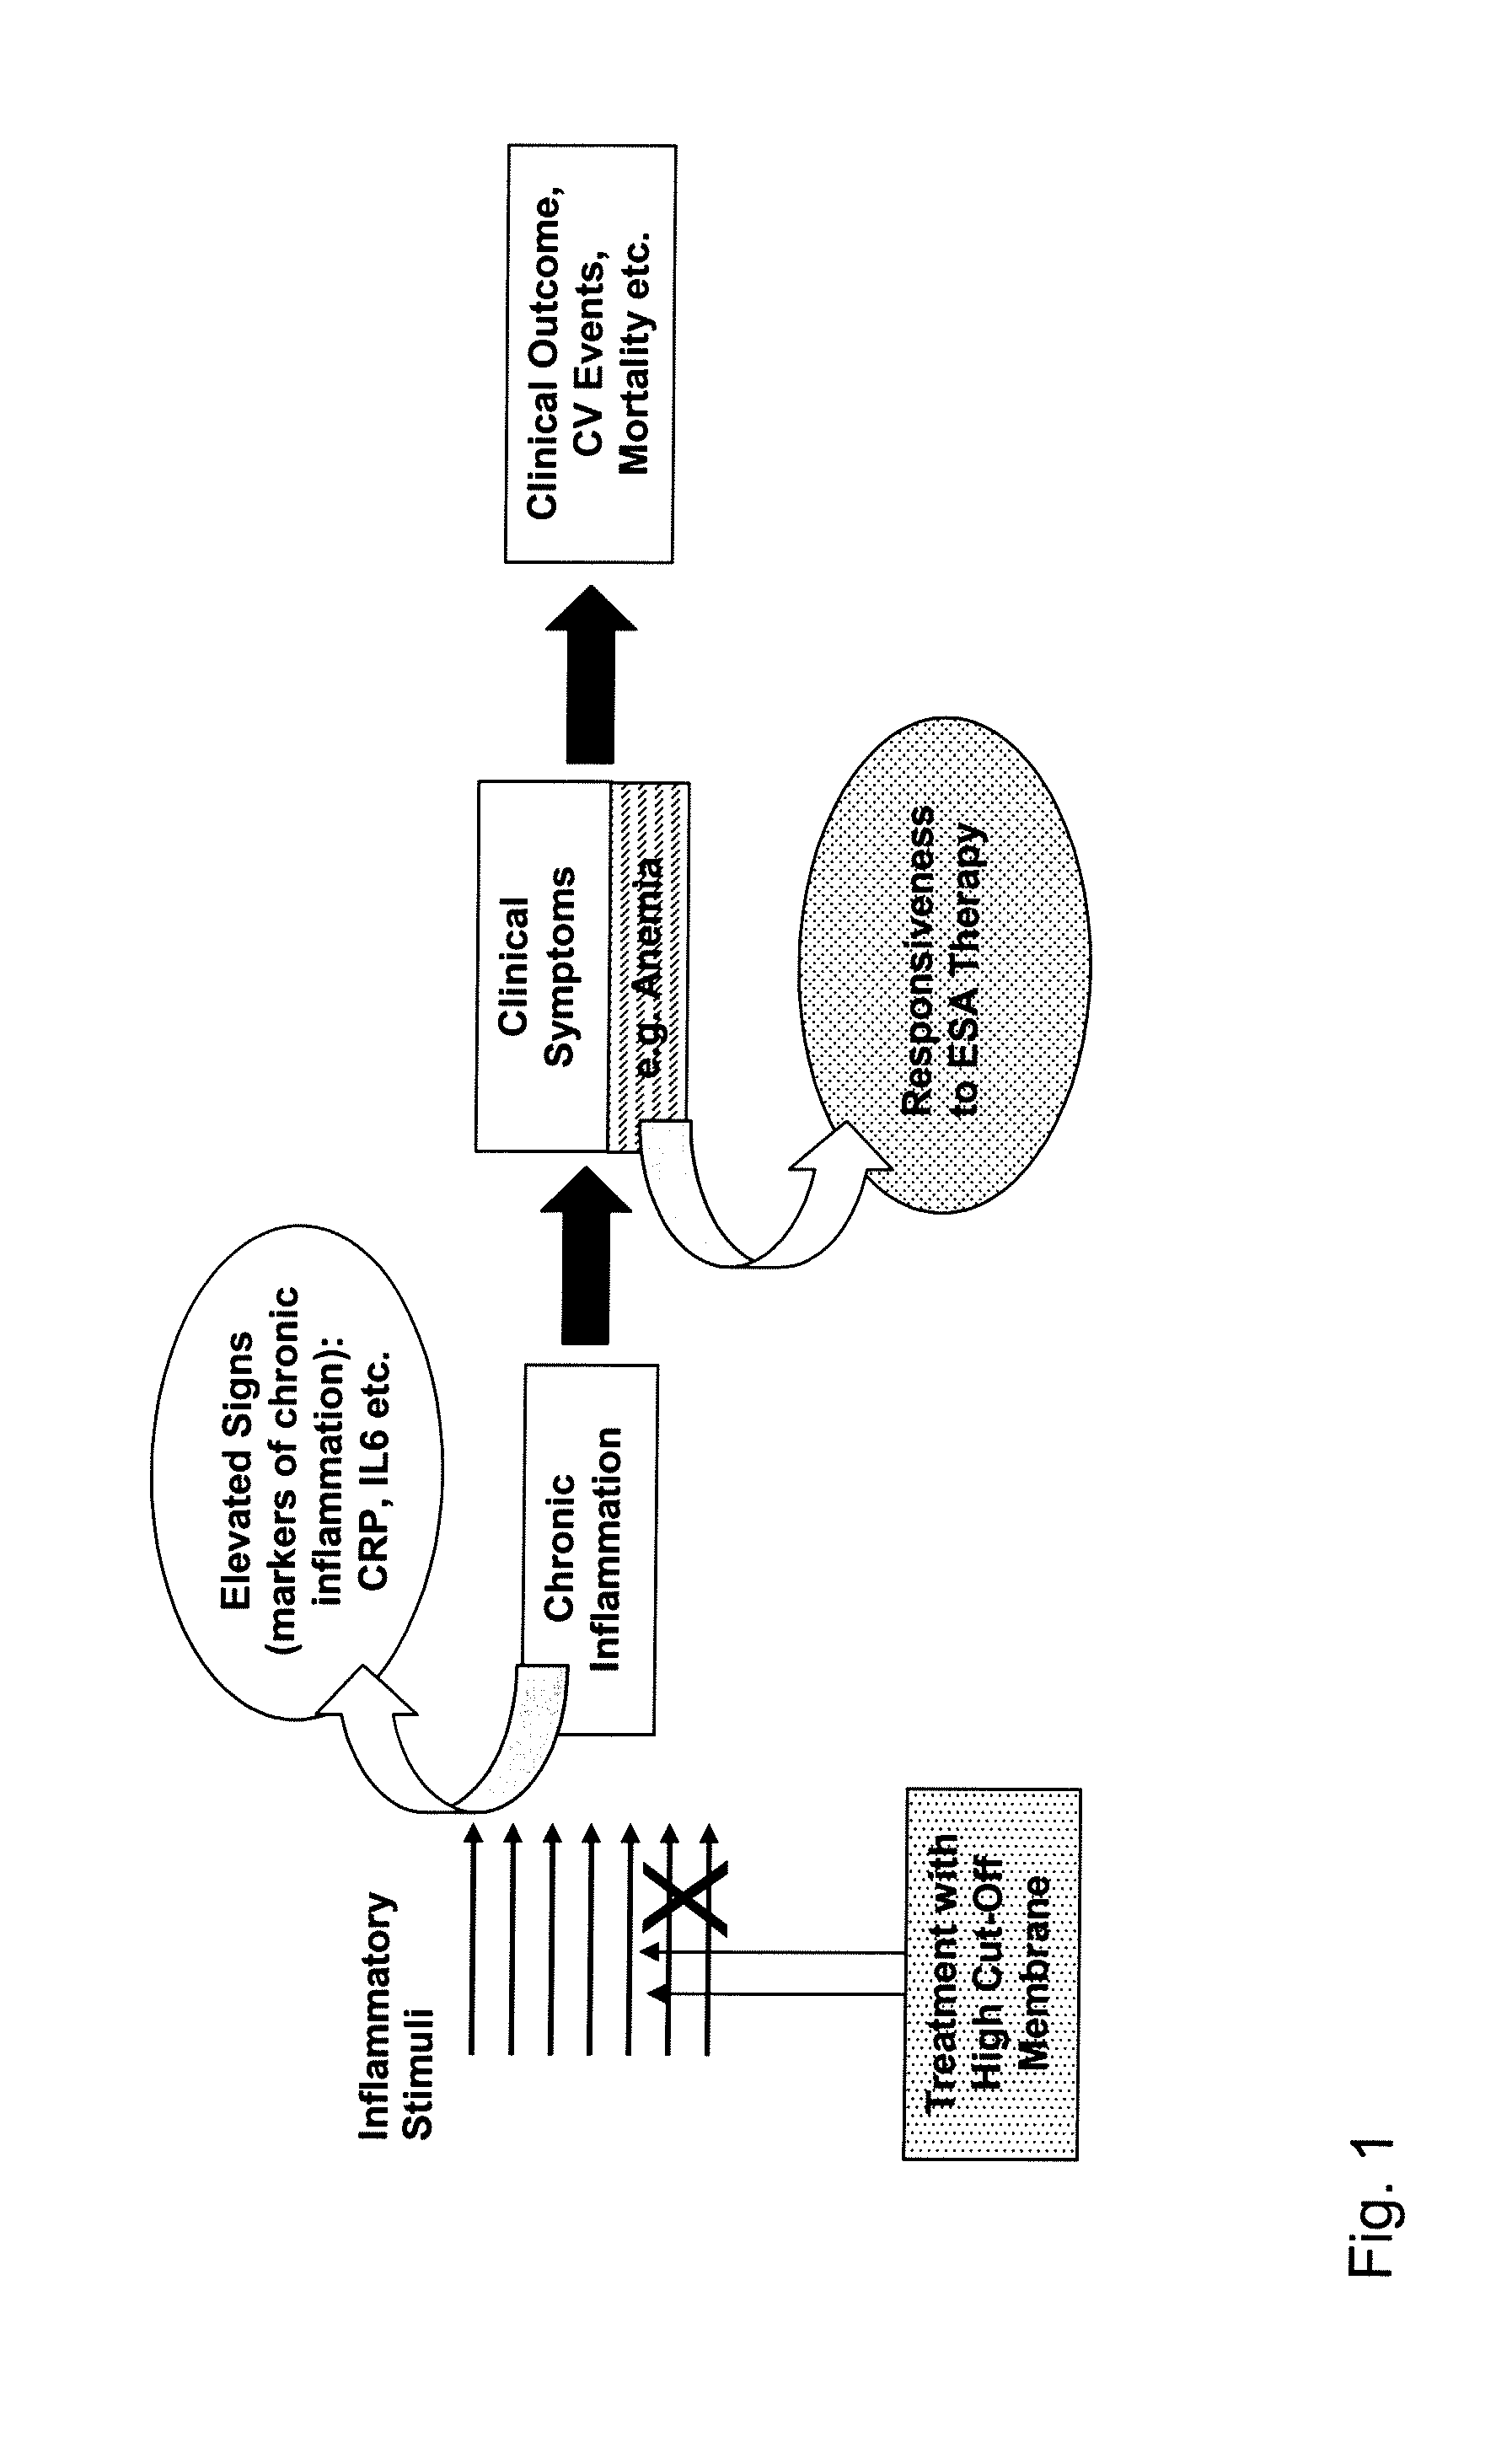 Method for Treating Anemia in Hemodialysis Patients